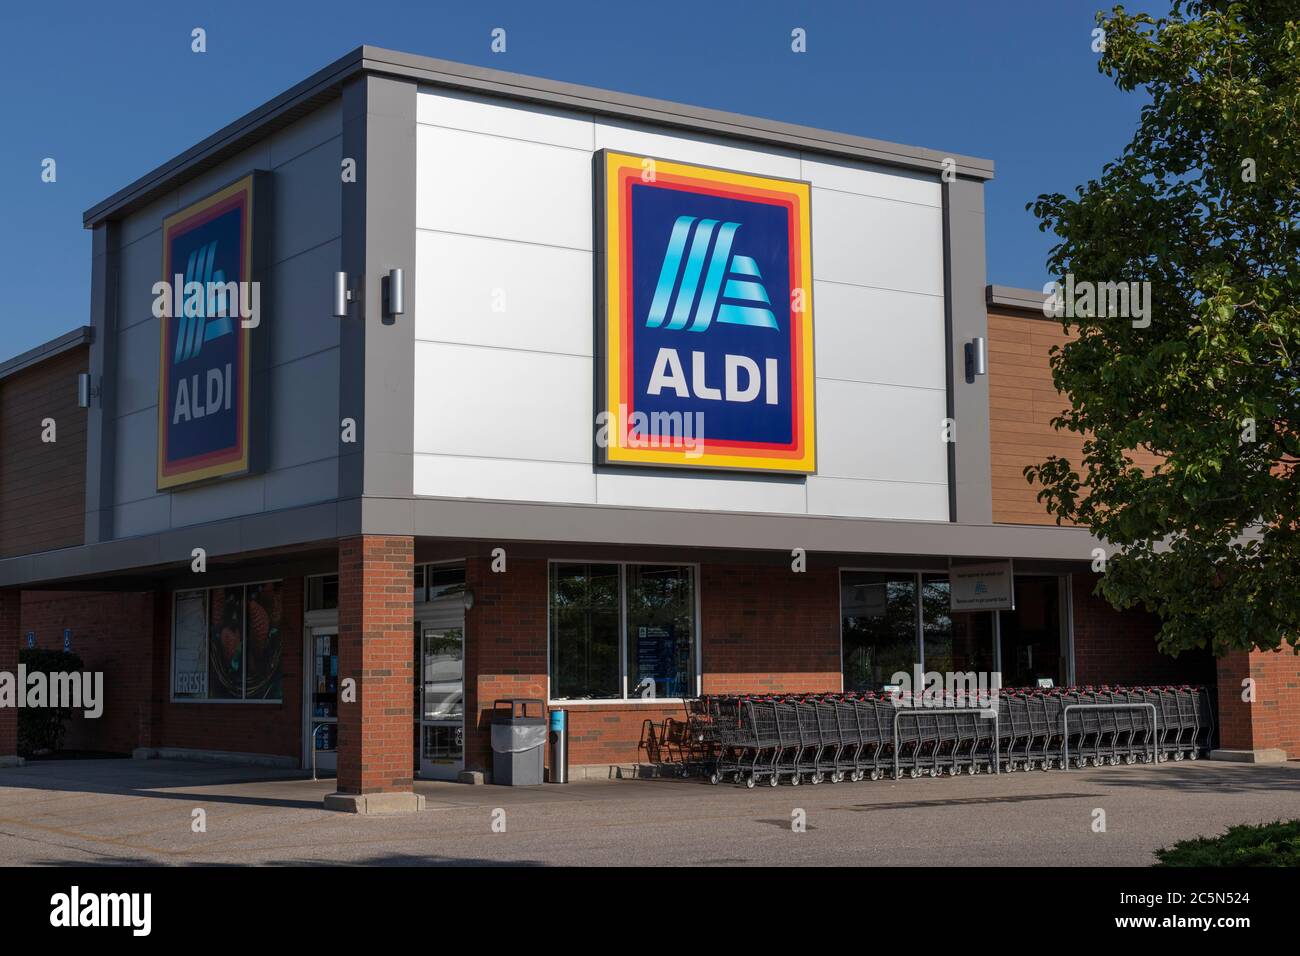 Shelbyville - Circa July 2020: Aldi Discount Supermarket. Aldi sells a range of grocery items, including produce, meat & dairy, at discount prices. Stock Photo